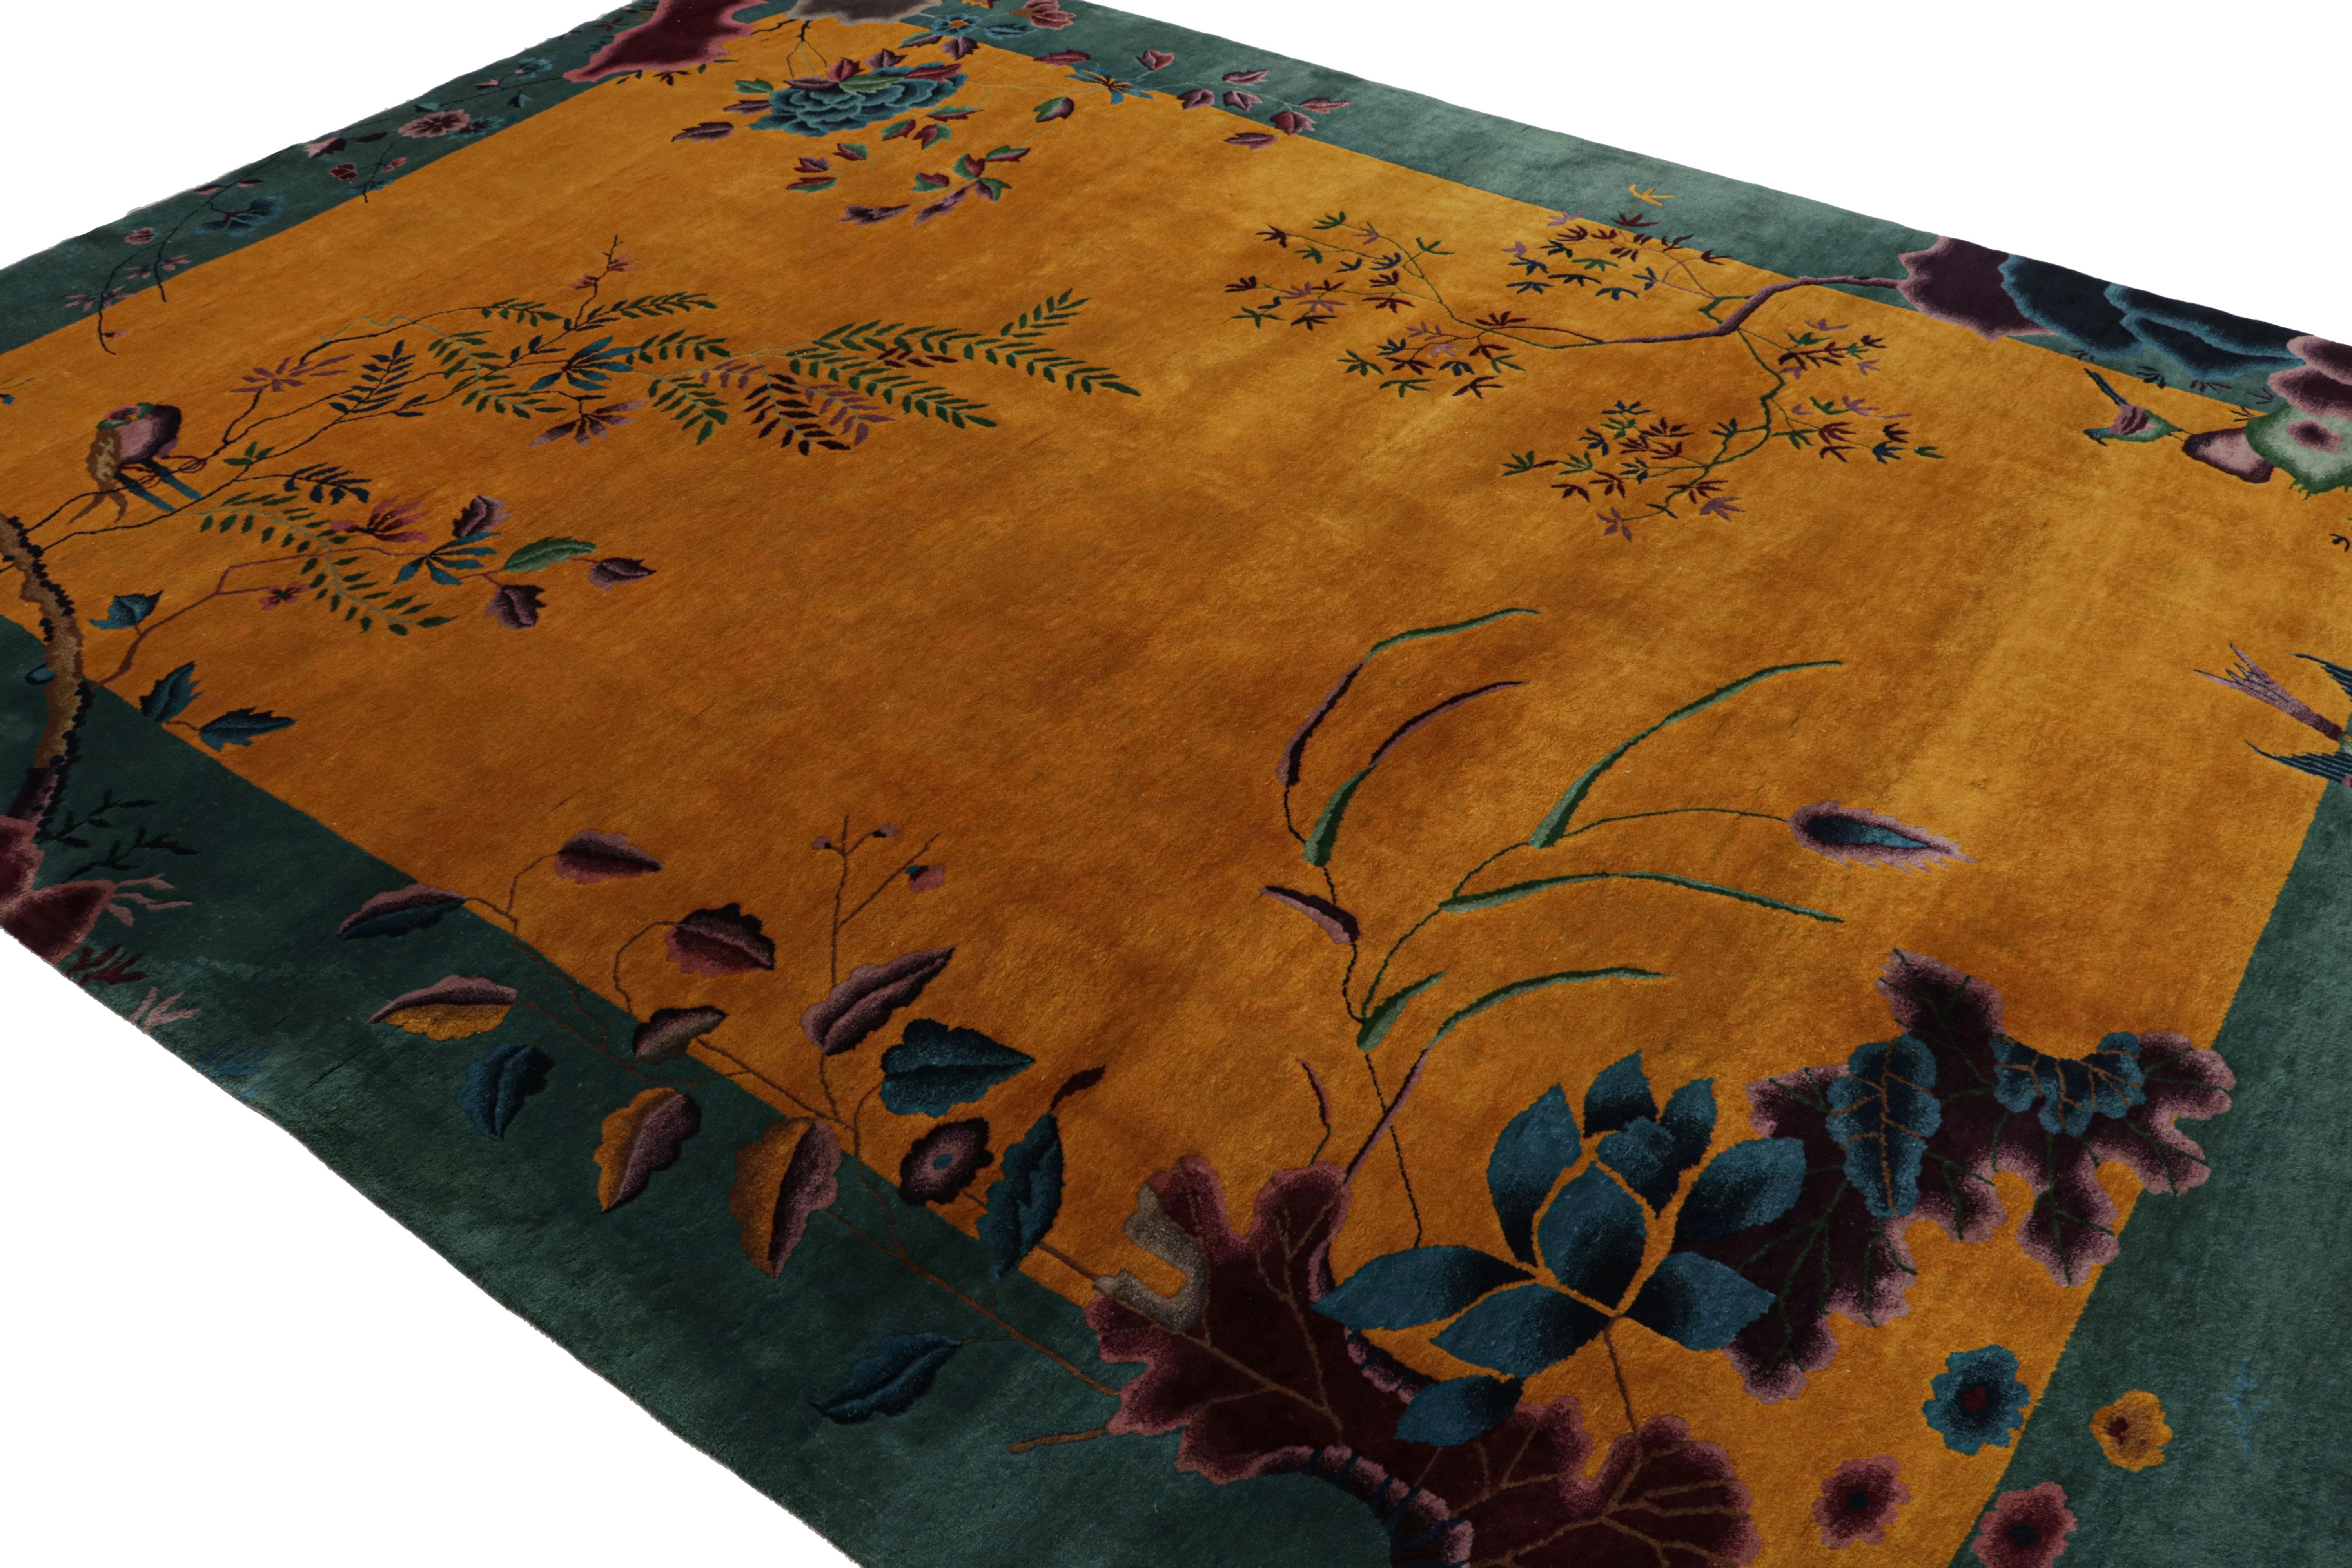 Hand-knotted wool circa 1925, a 9x12 antique Chinese art deco rug - latest to join Rug & Kilim’s antique collection.

On the Design:

This is a rare work from the Nichols style curations of its period, with some of the most delicious jewel tones and